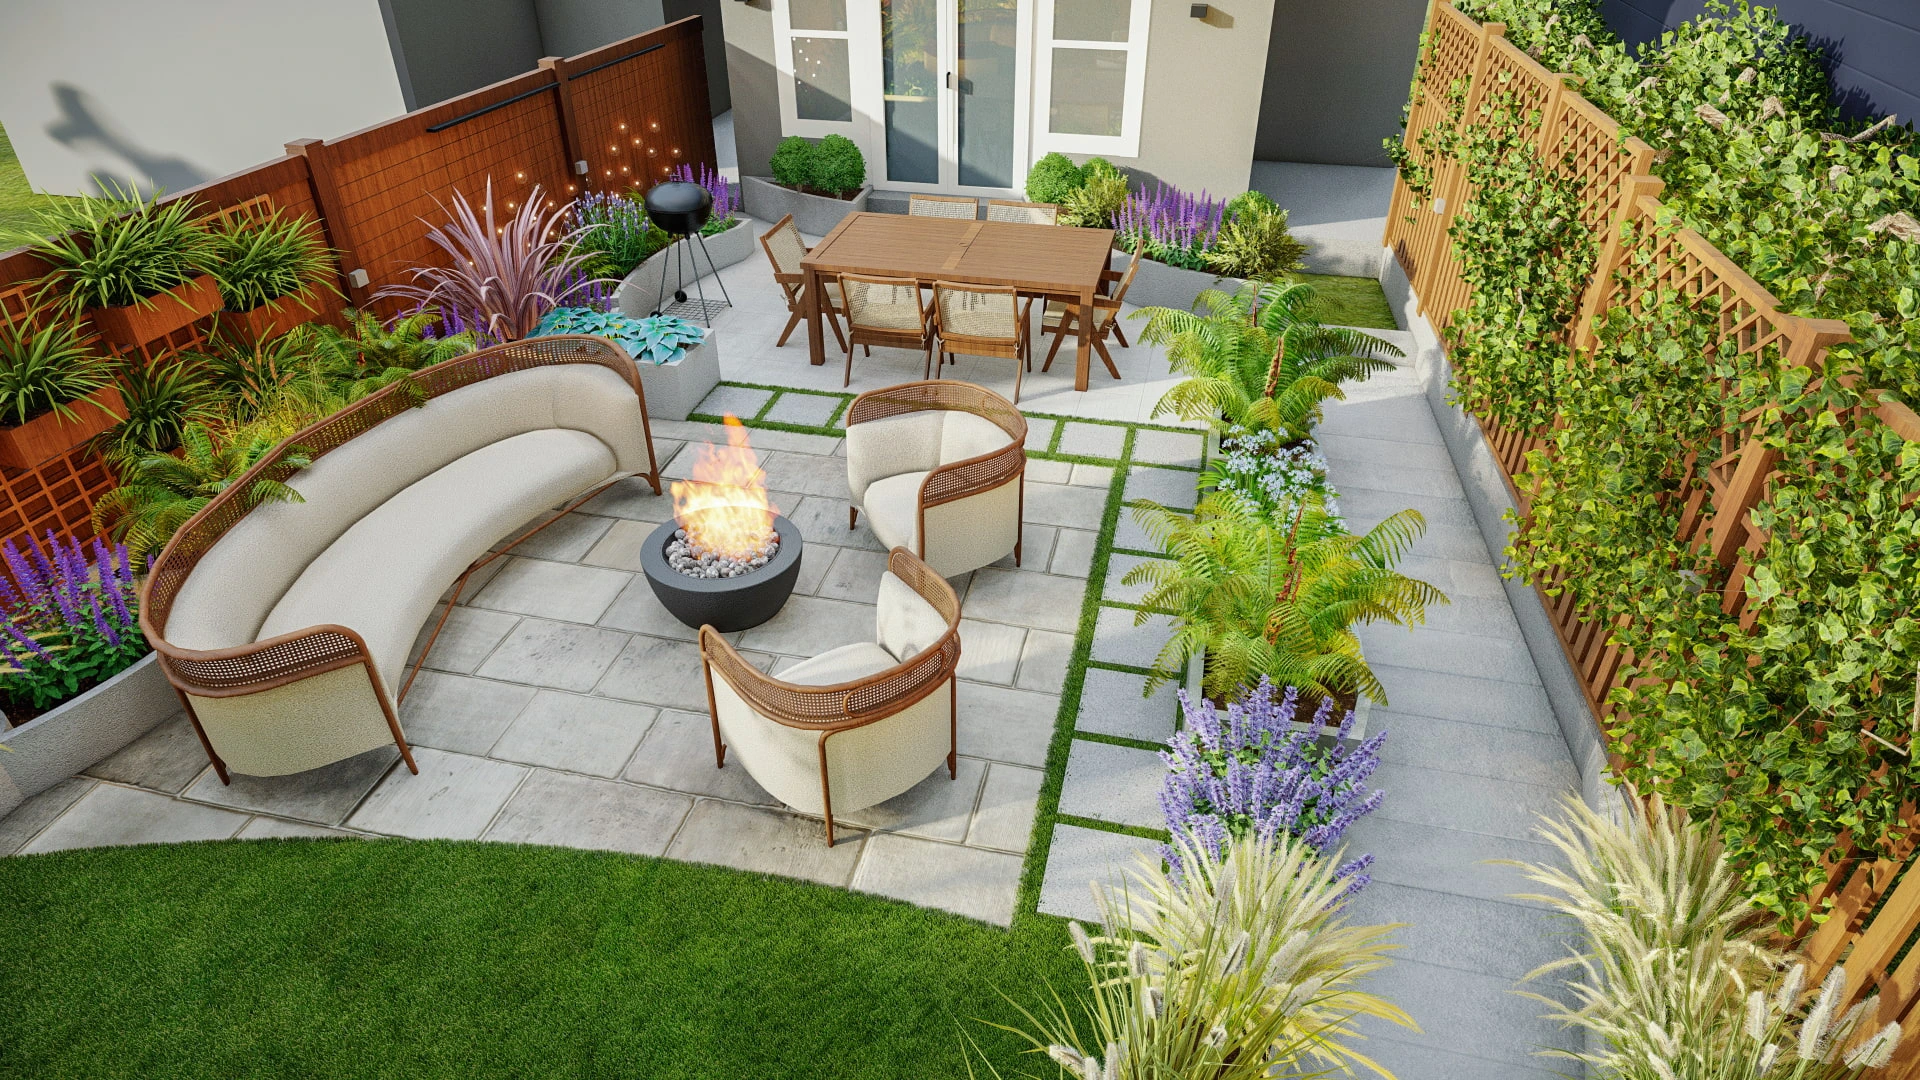 Safe and comfortable outdoor living space with fire pit and plush seating